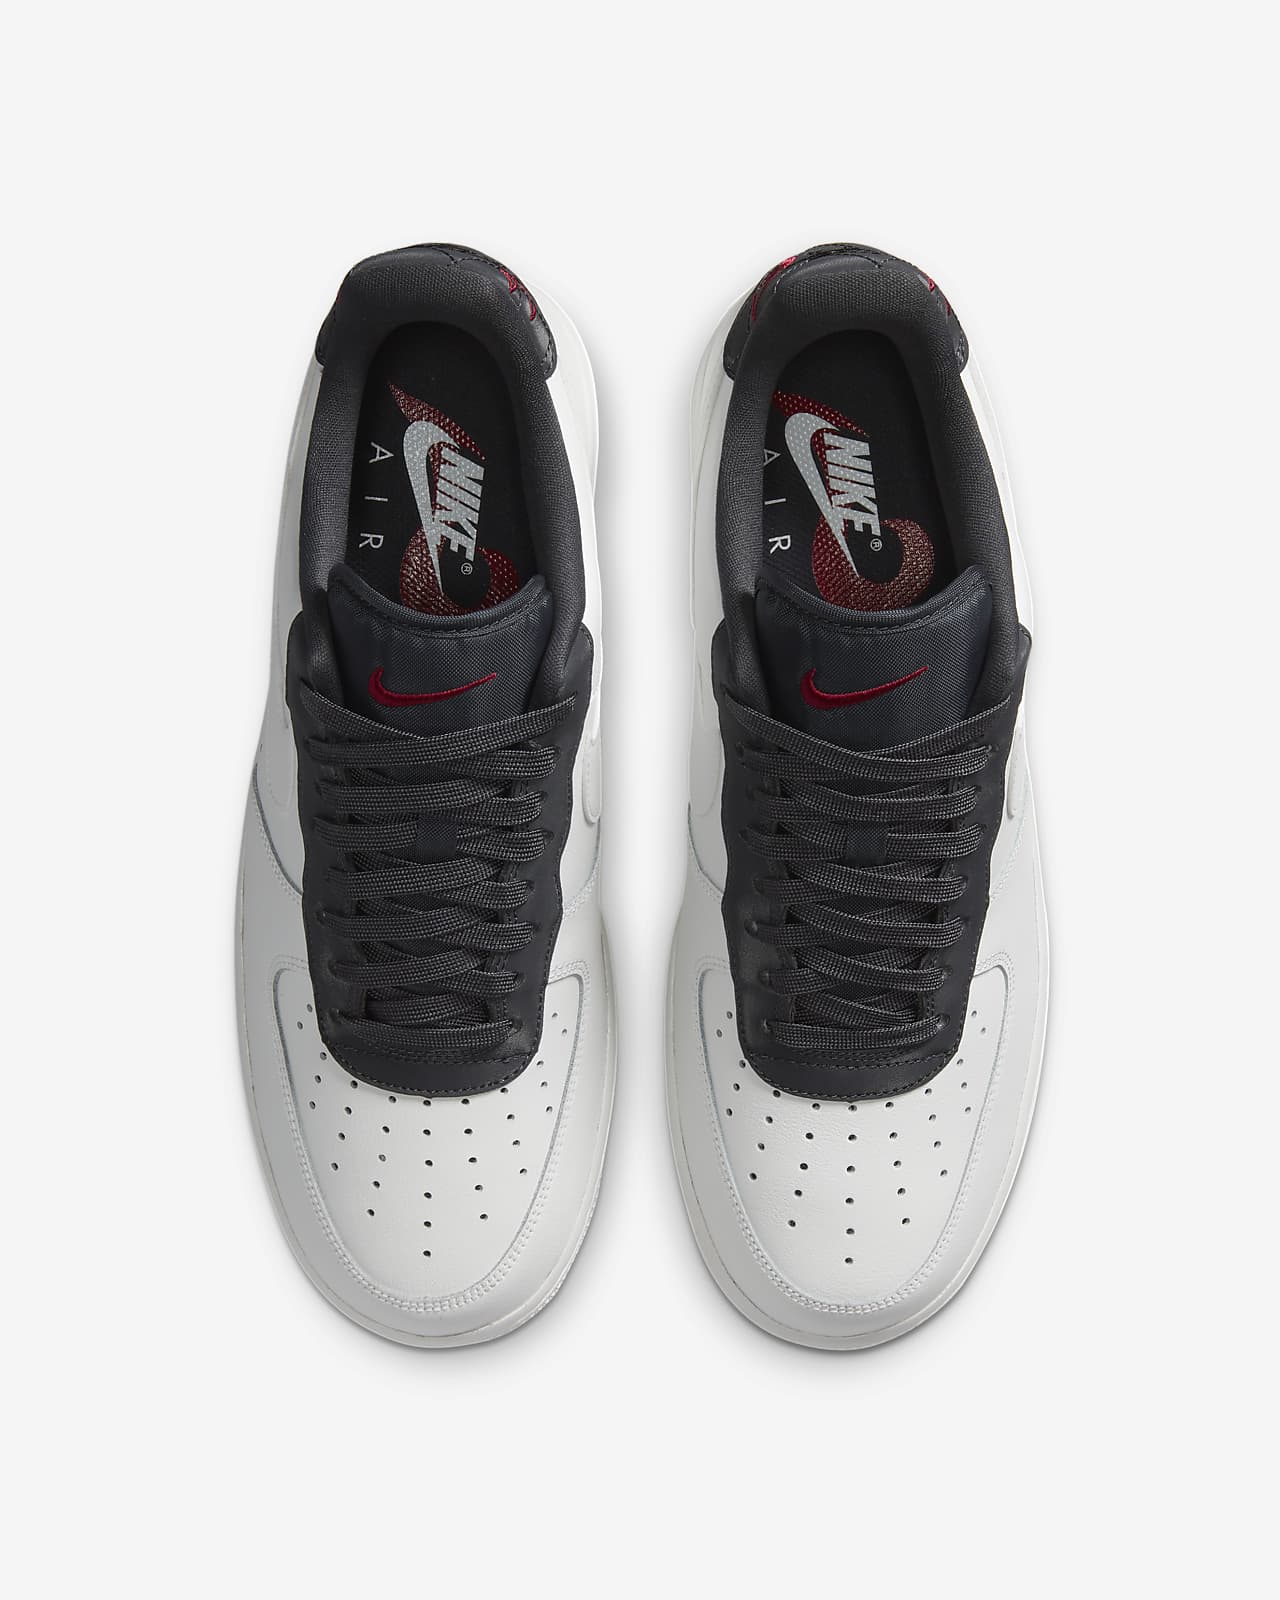 Nike Air Force 1 07 Lv8 Snkrs World